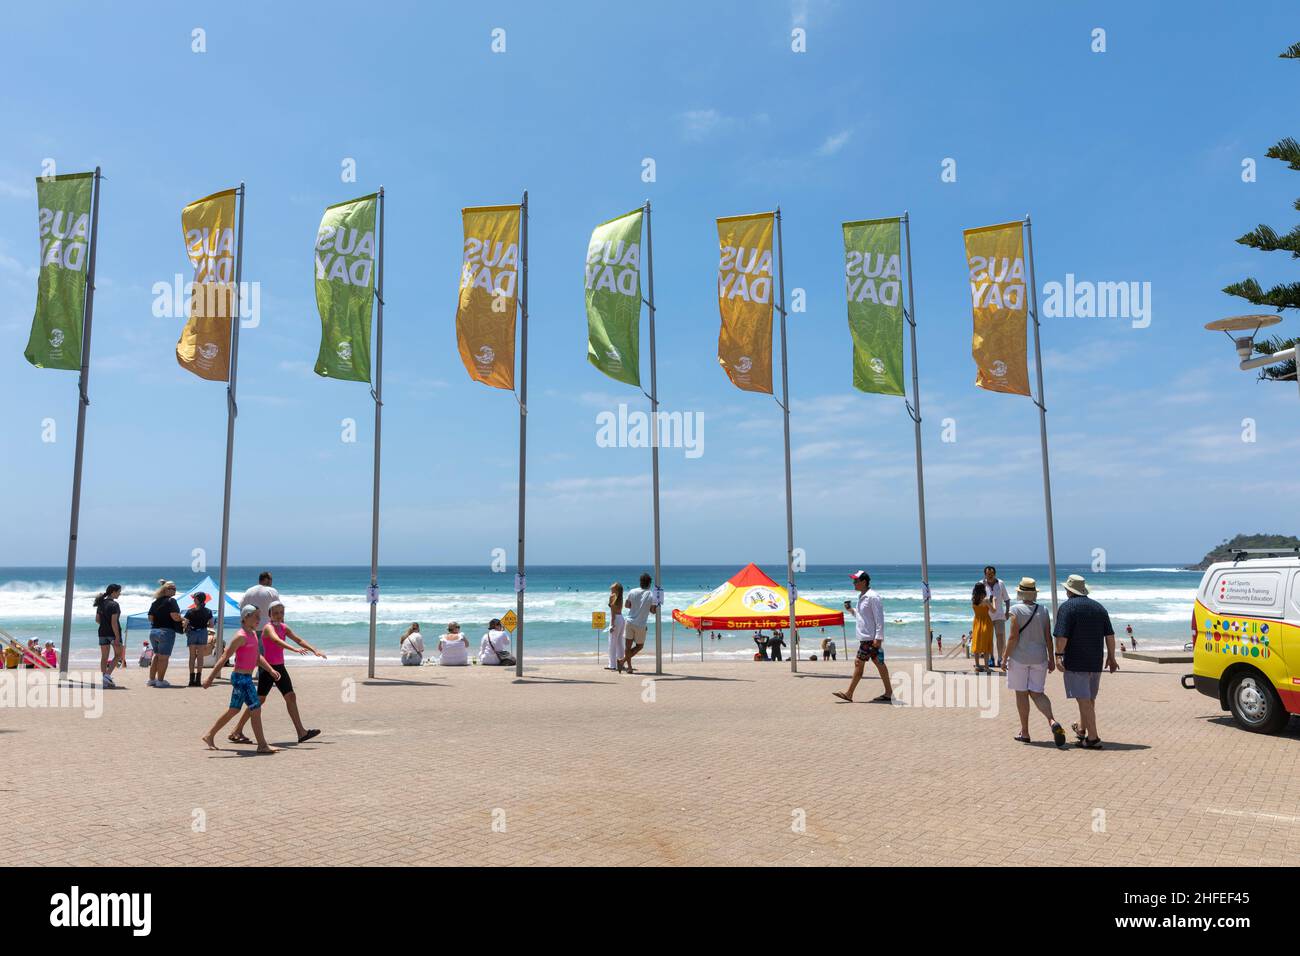 Manly Beach Sydney, council banners promoting Australia Day on 26th January 2022, surf rescue tent on the beach,Sydney,Australia Stock Photo